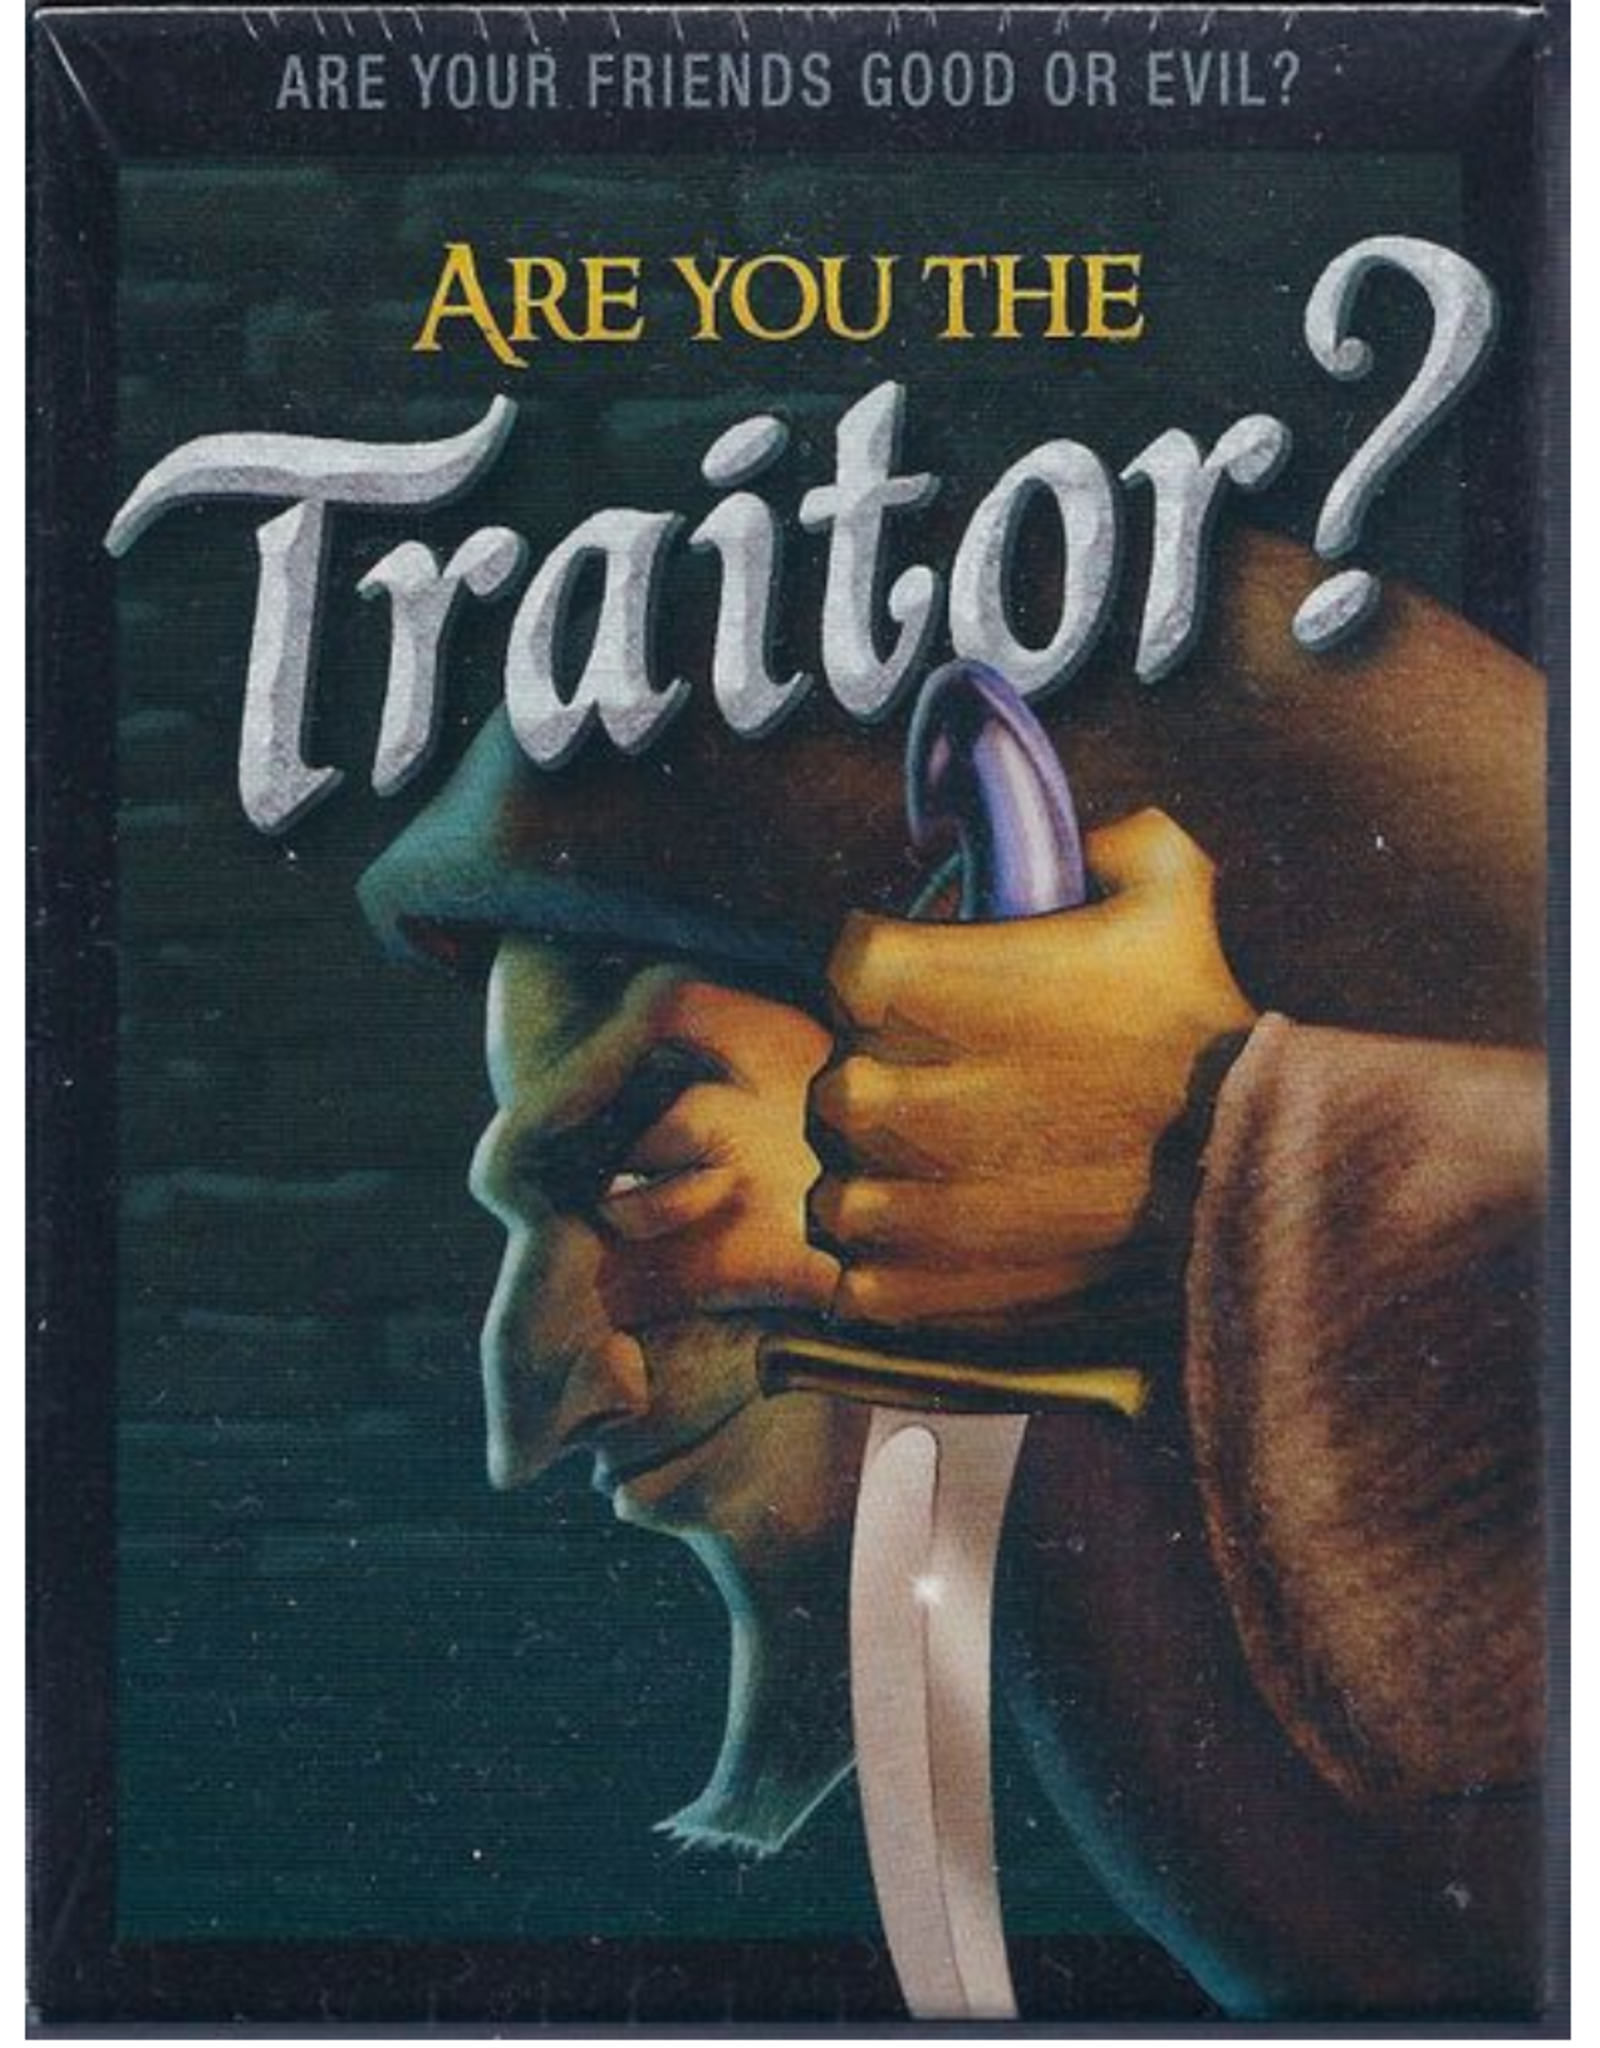 Are You The Traitor?